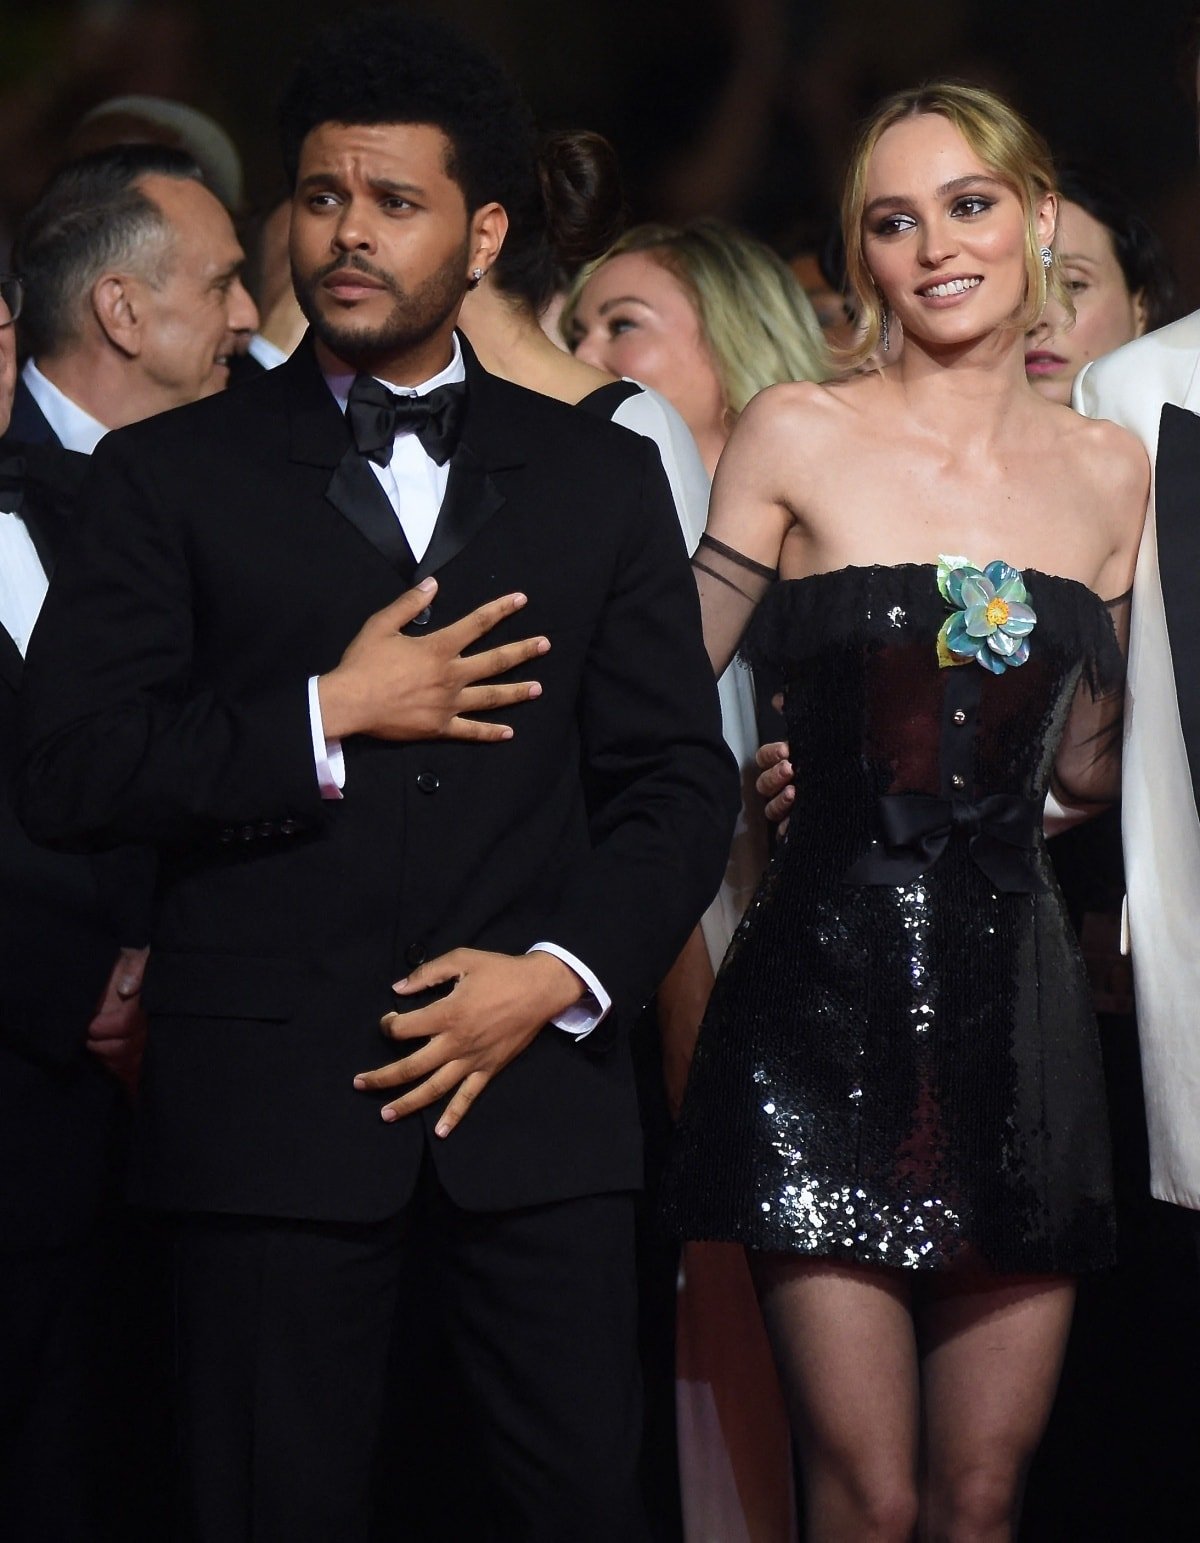 Abel Tesfaye in a bespoke Loewe tuxedo and Lily-Rose Depp in a Chanel Fall 1994 embellished bustier dress with a blue camellia accent